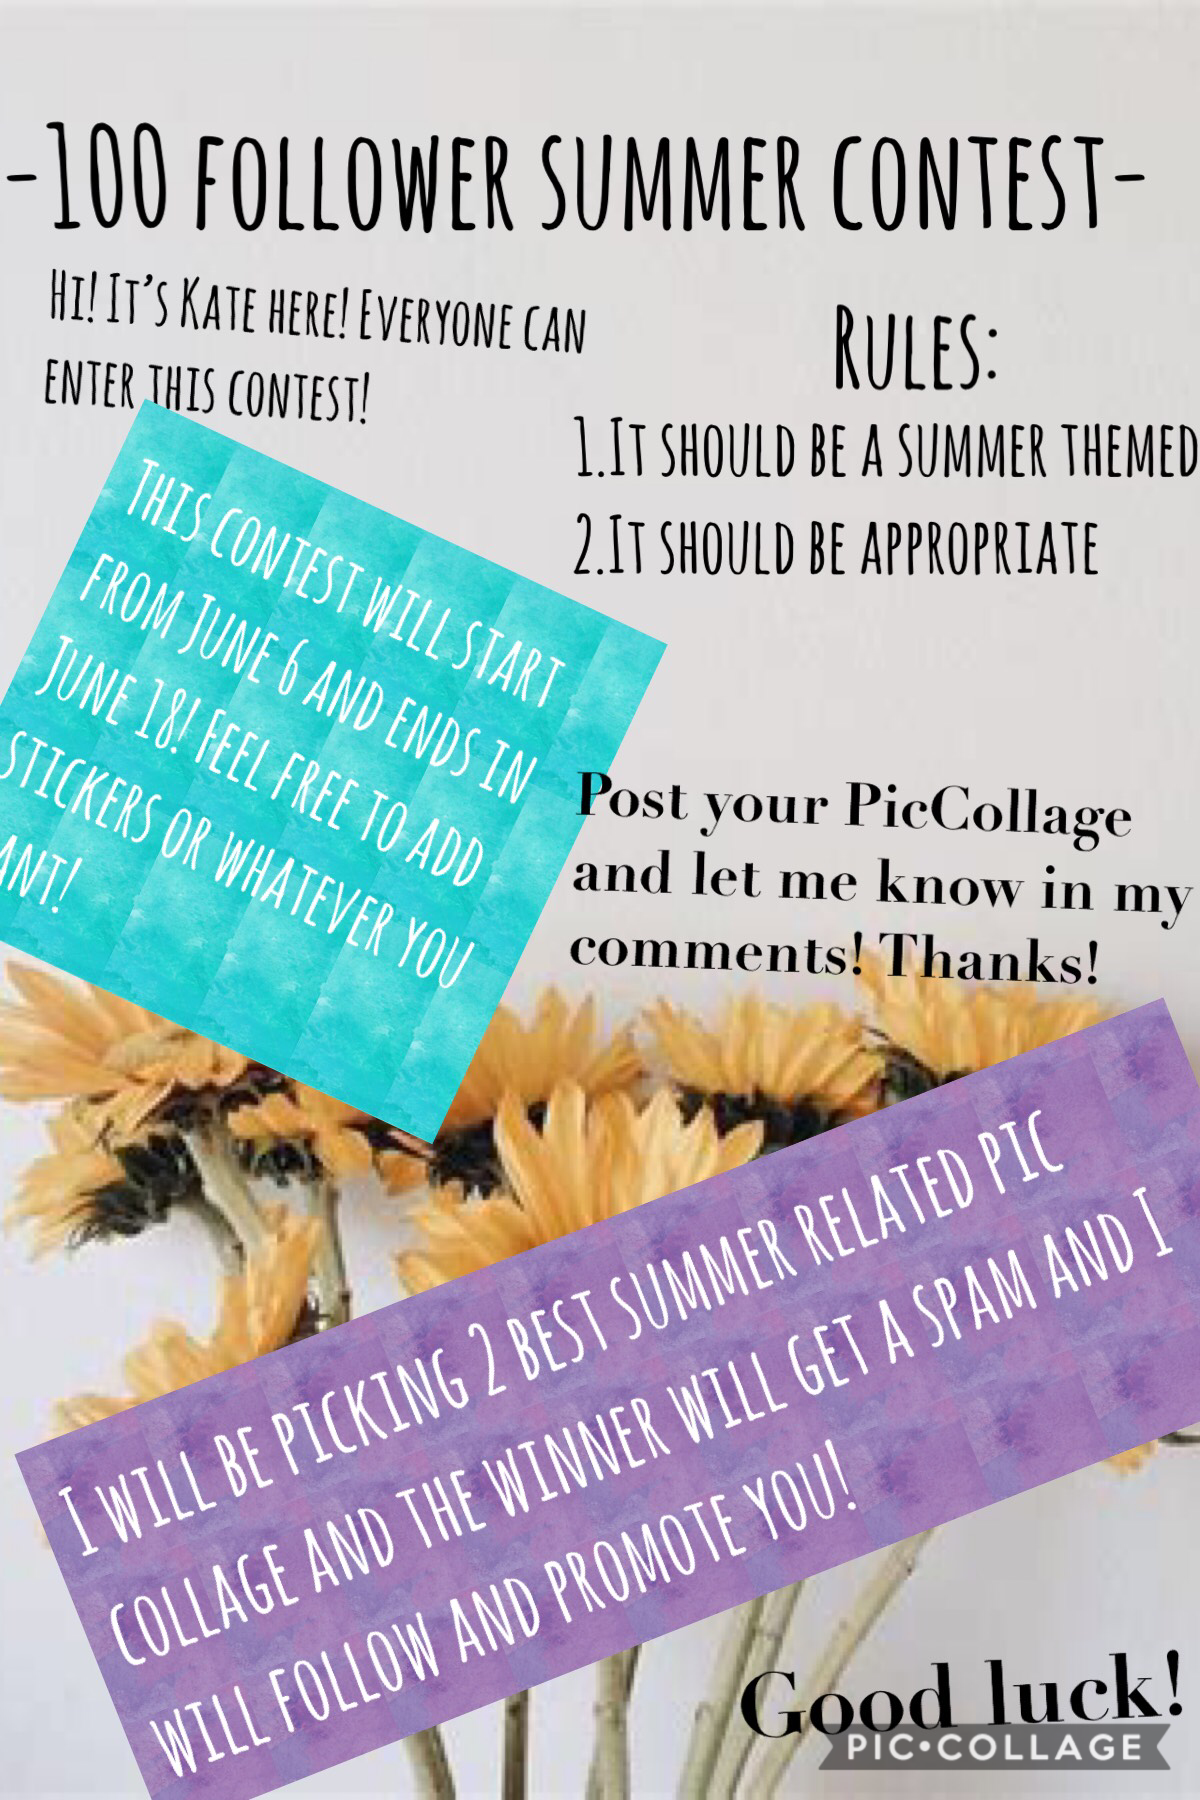 -100 followers summer contest- ((EVERYONE CAN ENTER))

Rule
1. It should be appropriate 
2. It should be summer themed

After making the PicCollage, make it in the remix sections or post it on your pic collage and let me know on the comments!

Feel free a